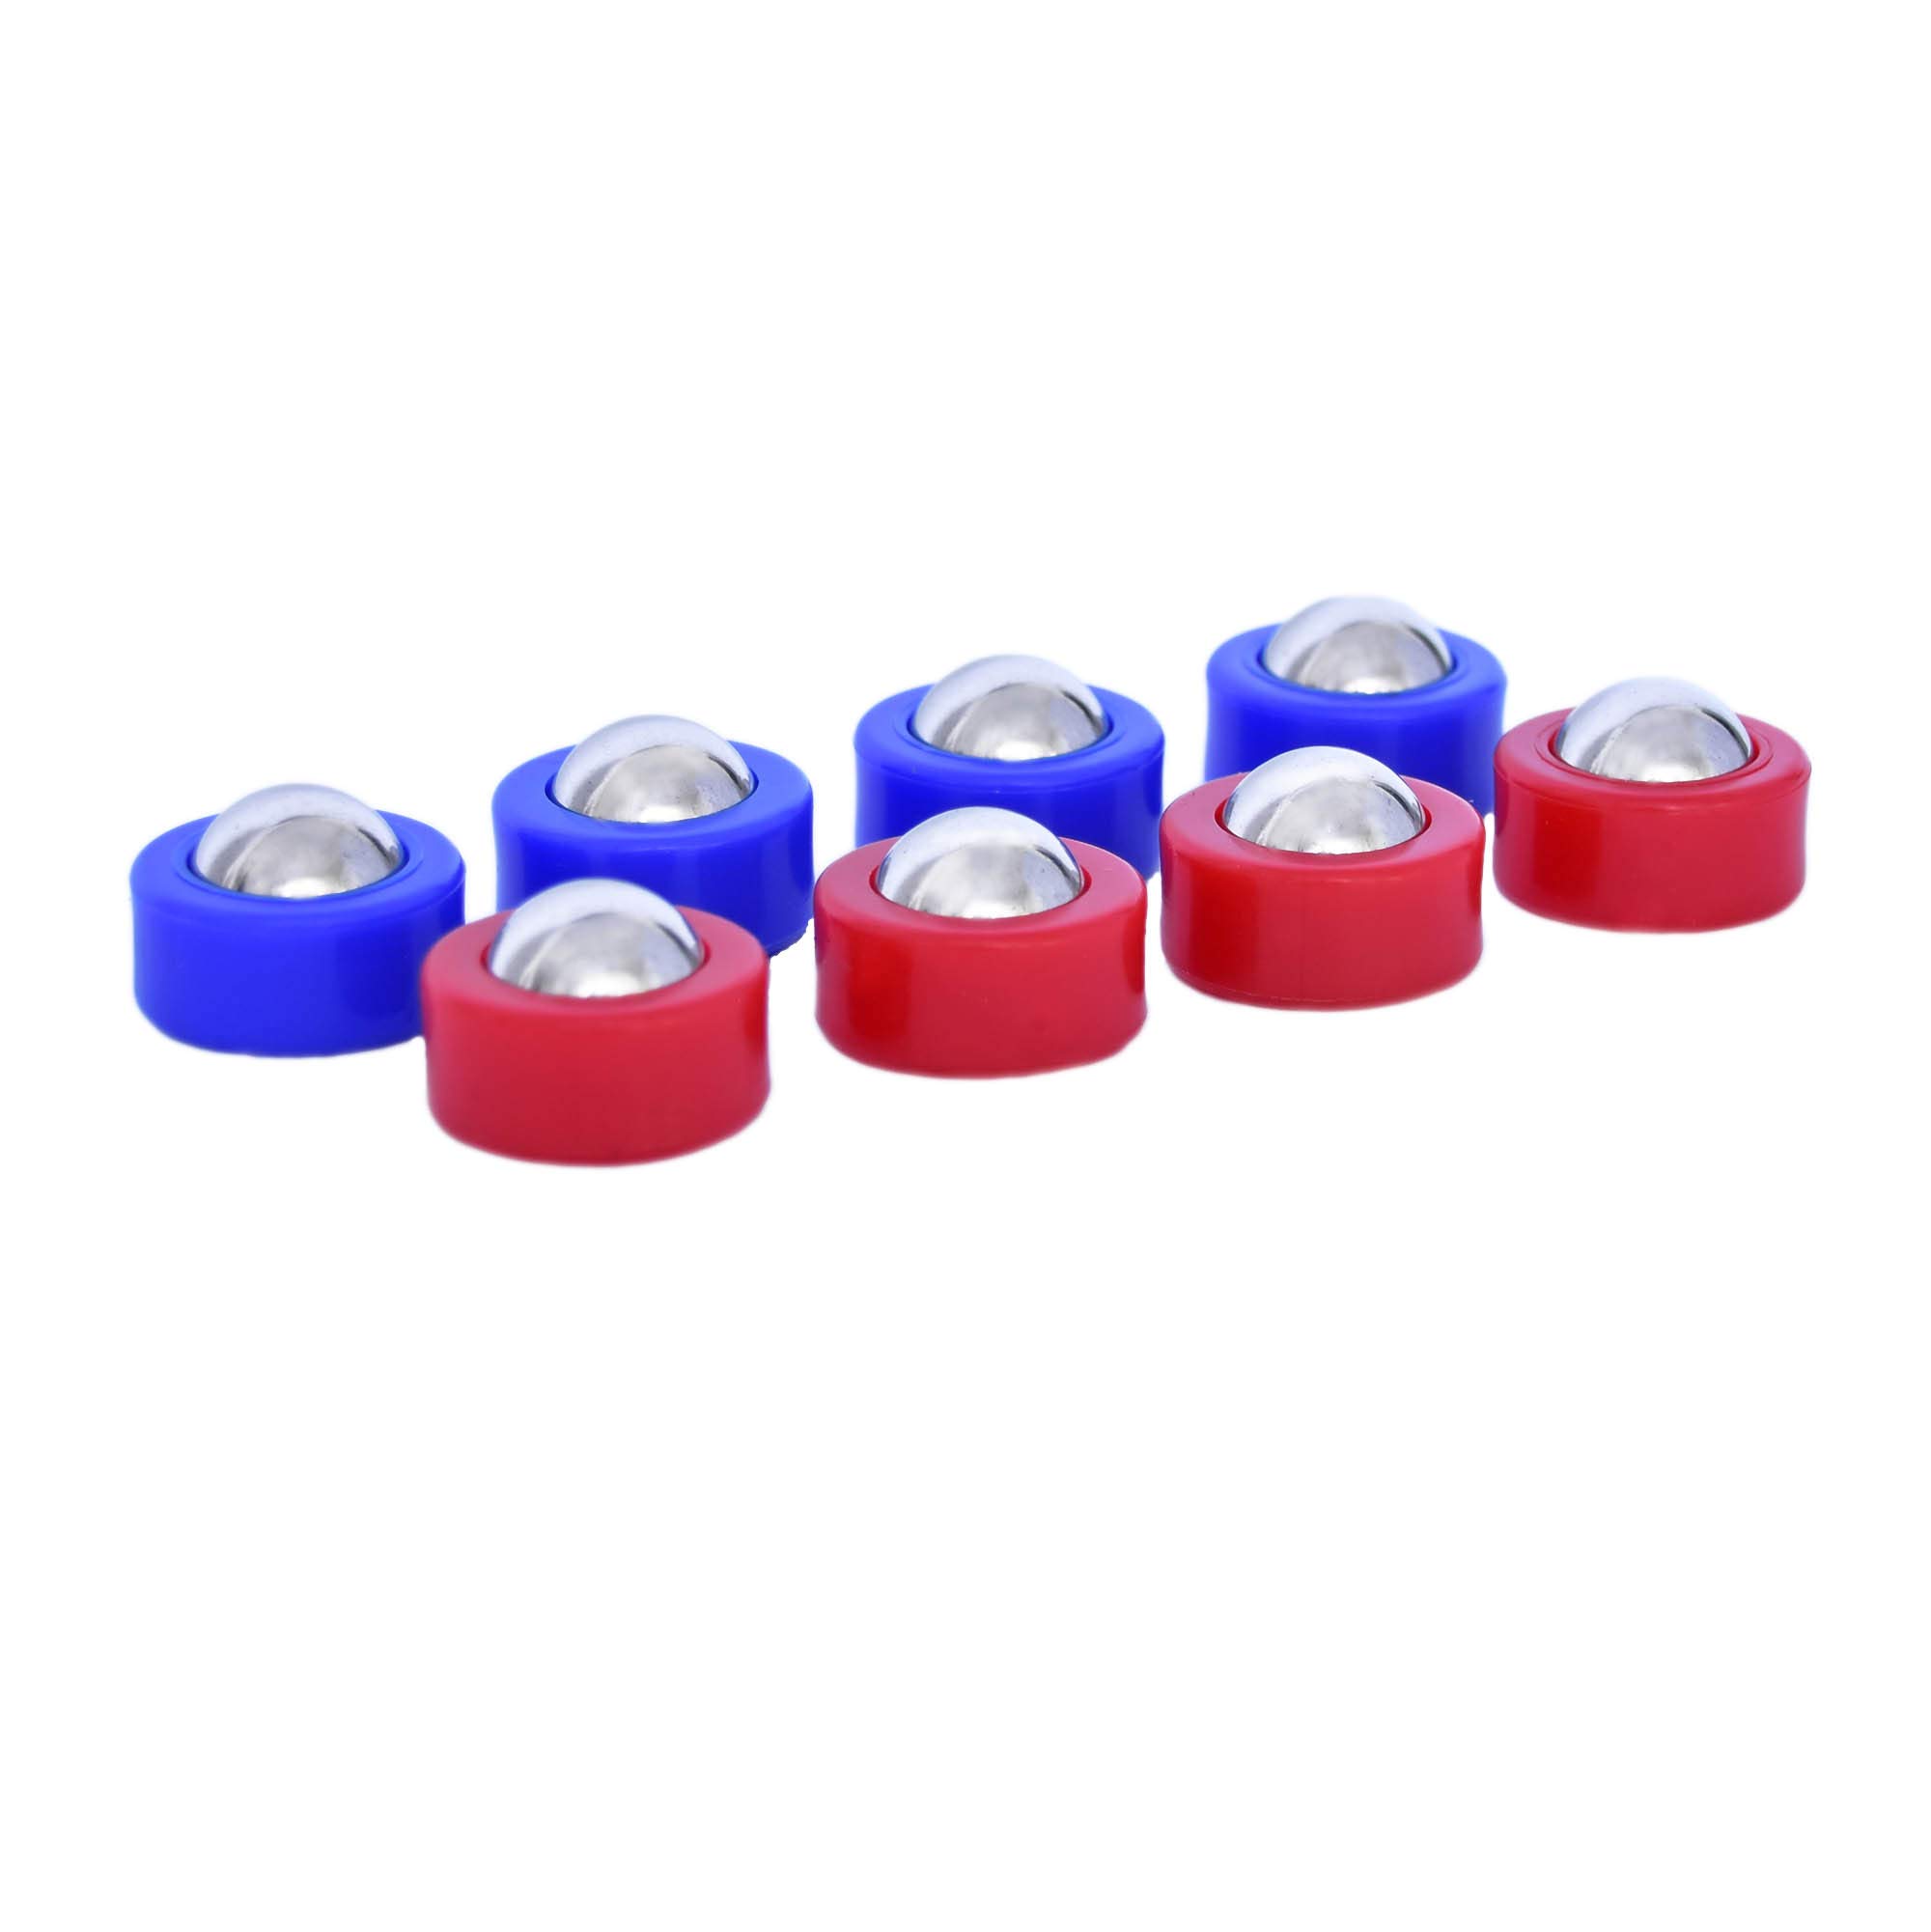 GoSports Shuffle Board Mini Roller Replacement Set of 8 Rollers